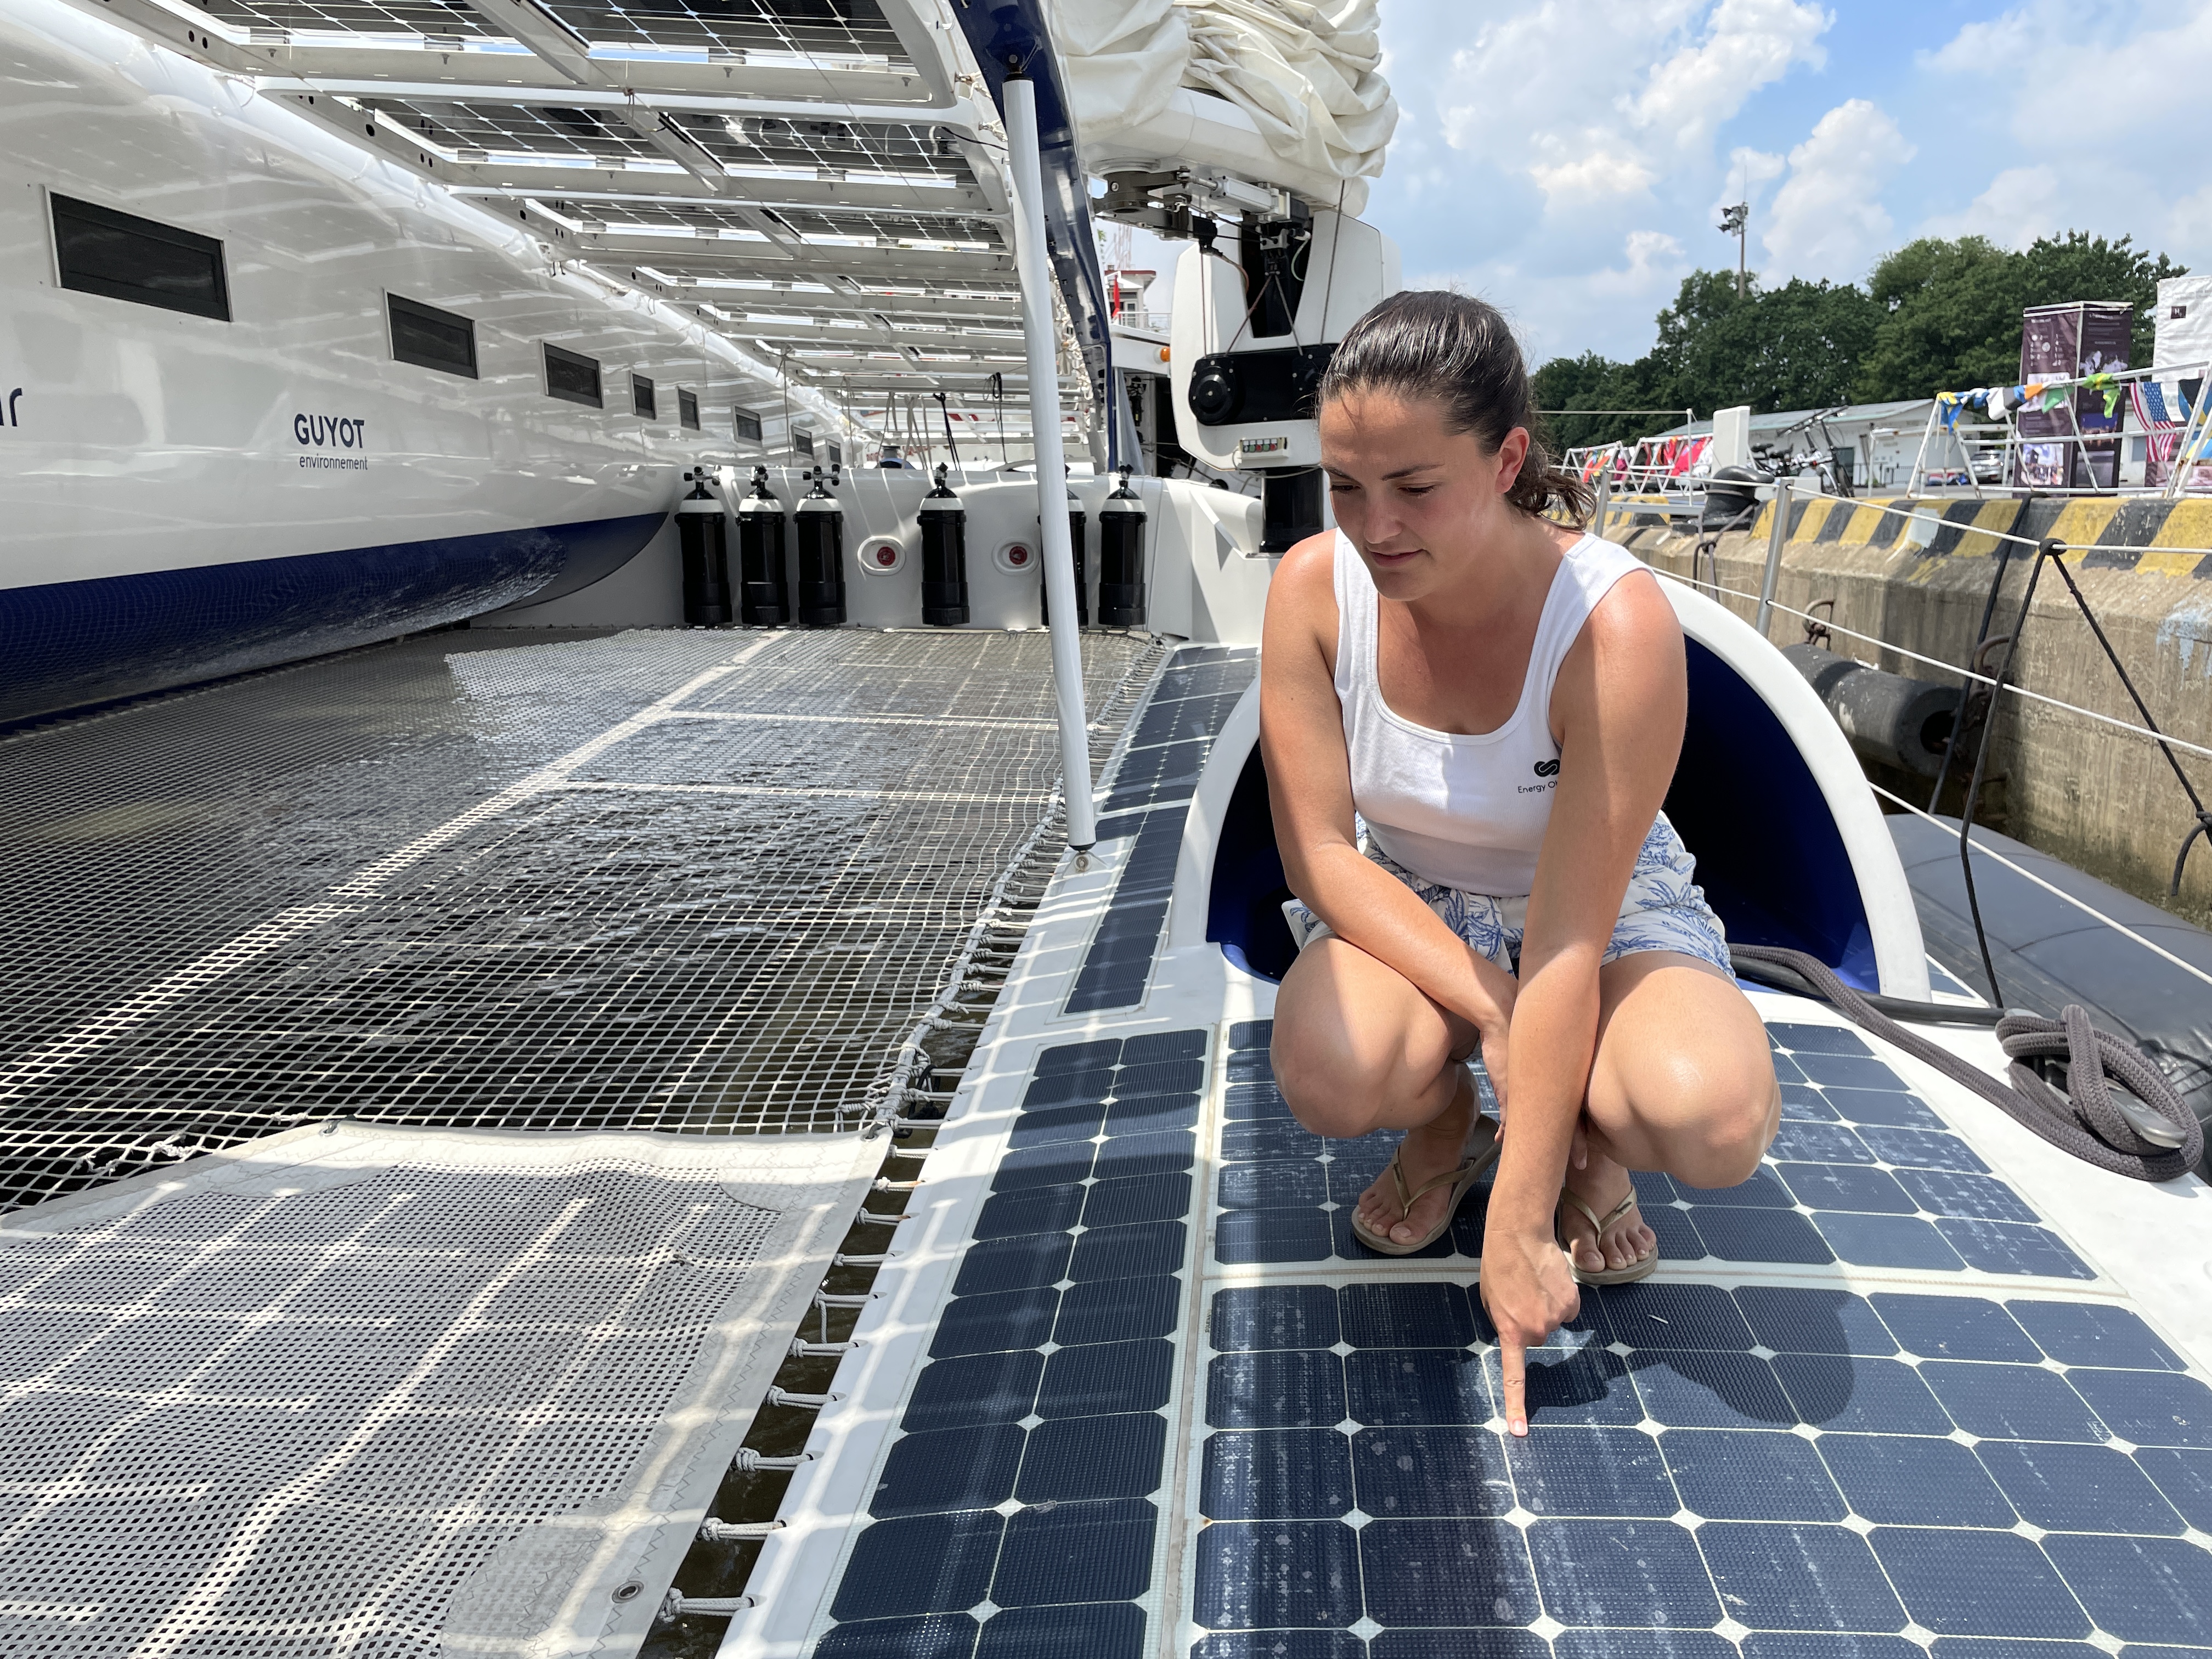 A crew member shows off the solar panels on the Energy Observer during its stopover in Ho Chi Minh City. Photo: Minh Khoi / Tuoi Tre